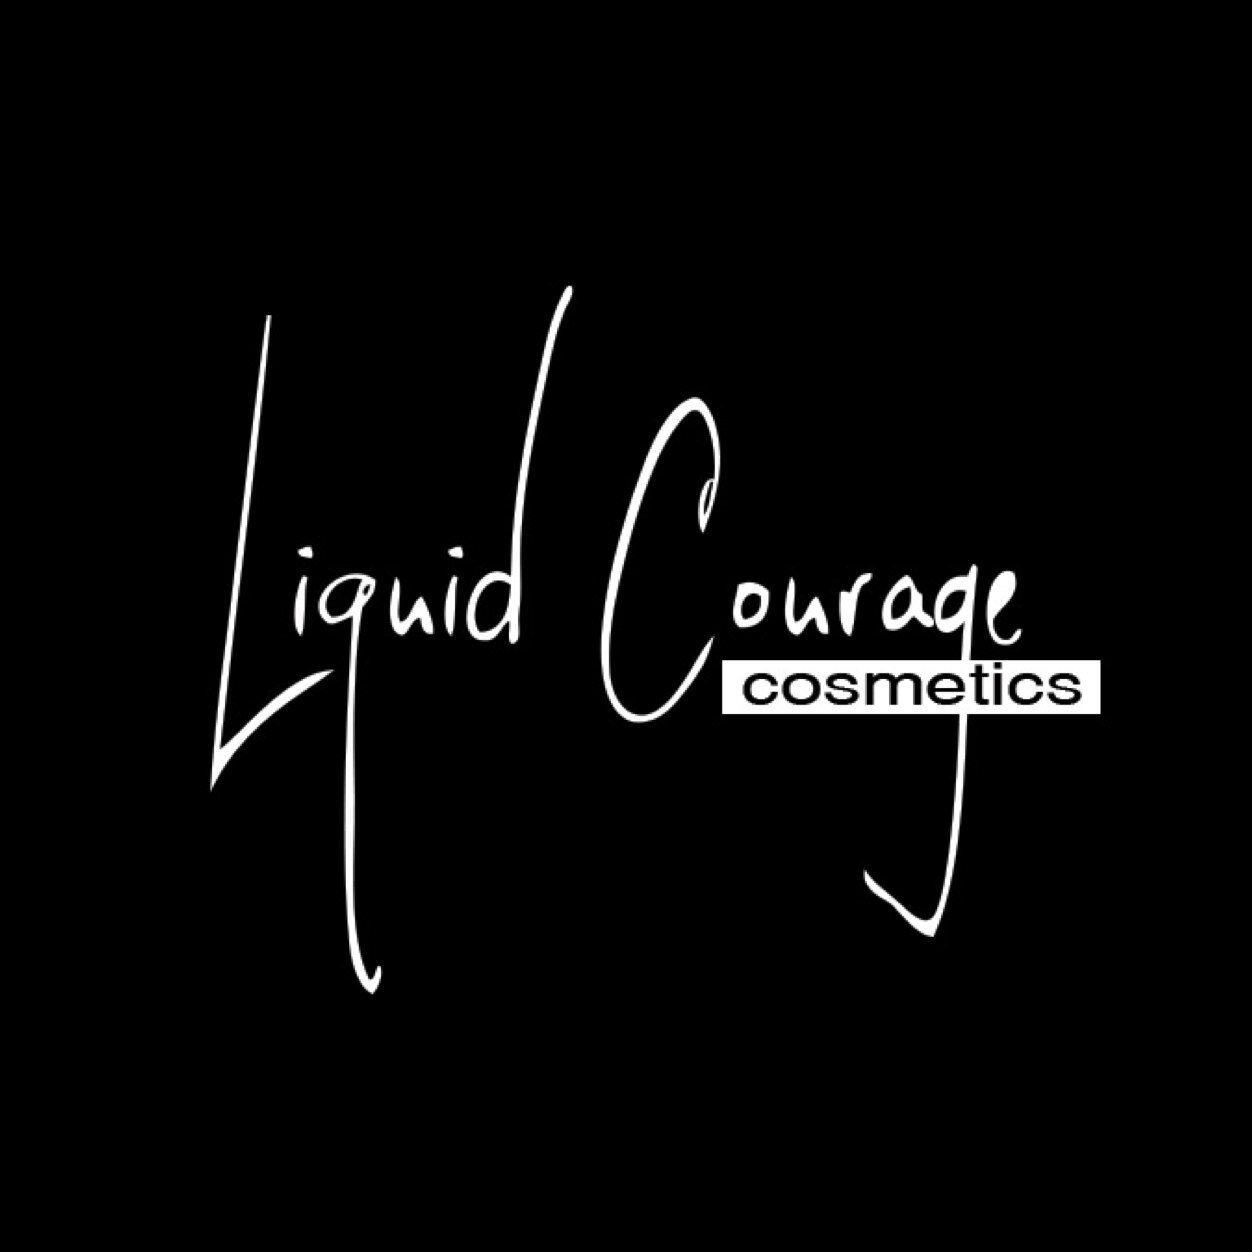 20% Off With Liquid Courage Cosmetics Coupon